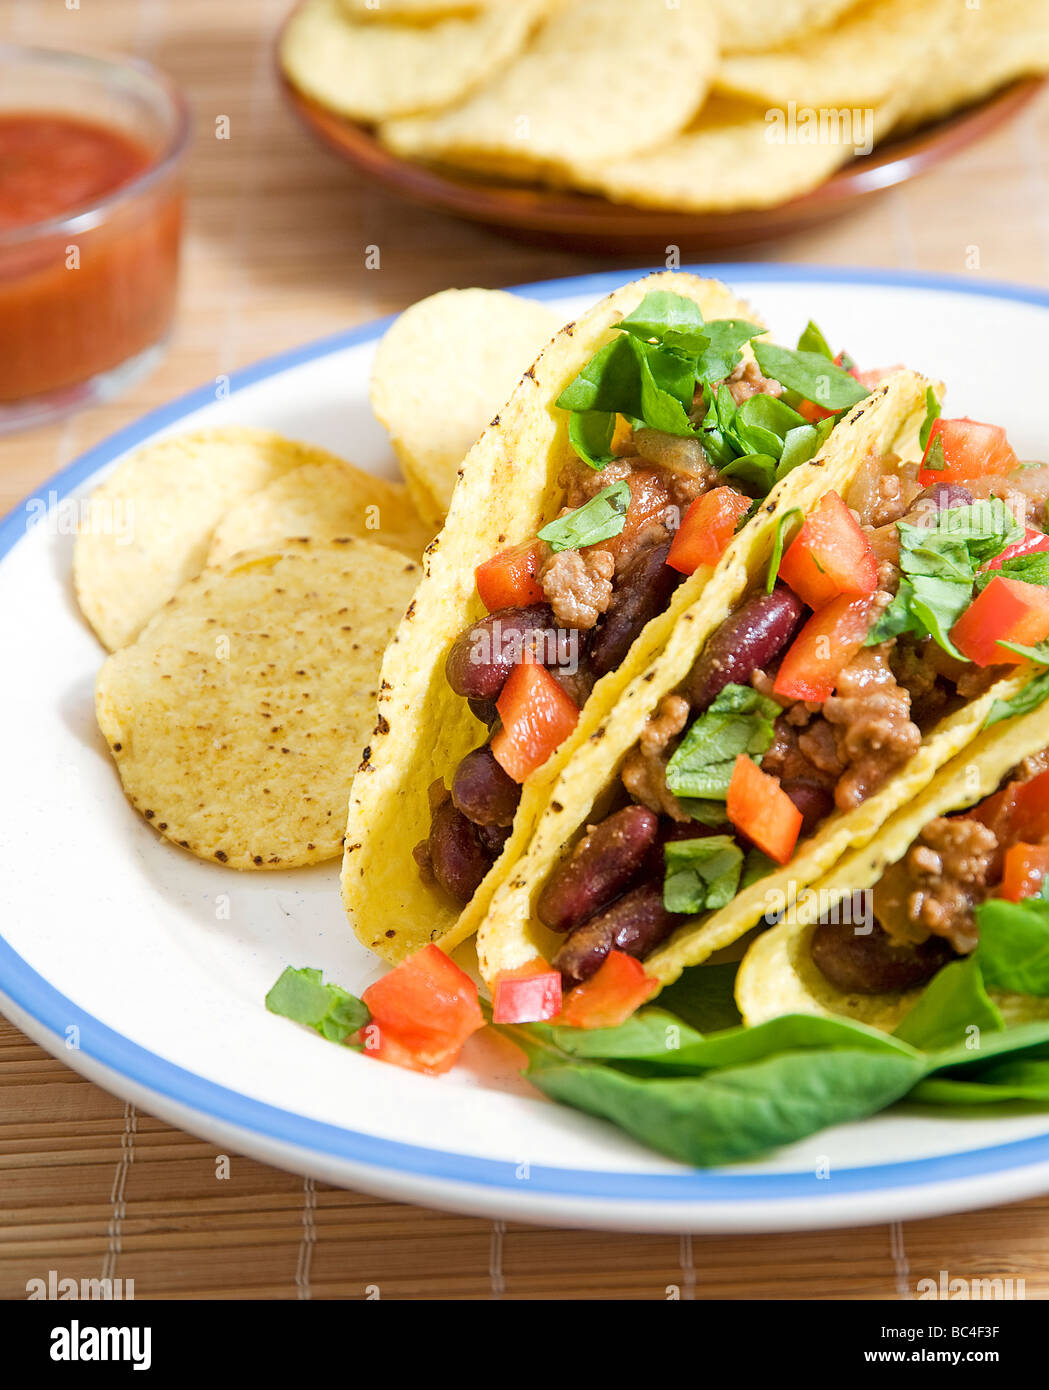 Tacos stuffed with beans meat salad and tomatoes Stock Photo